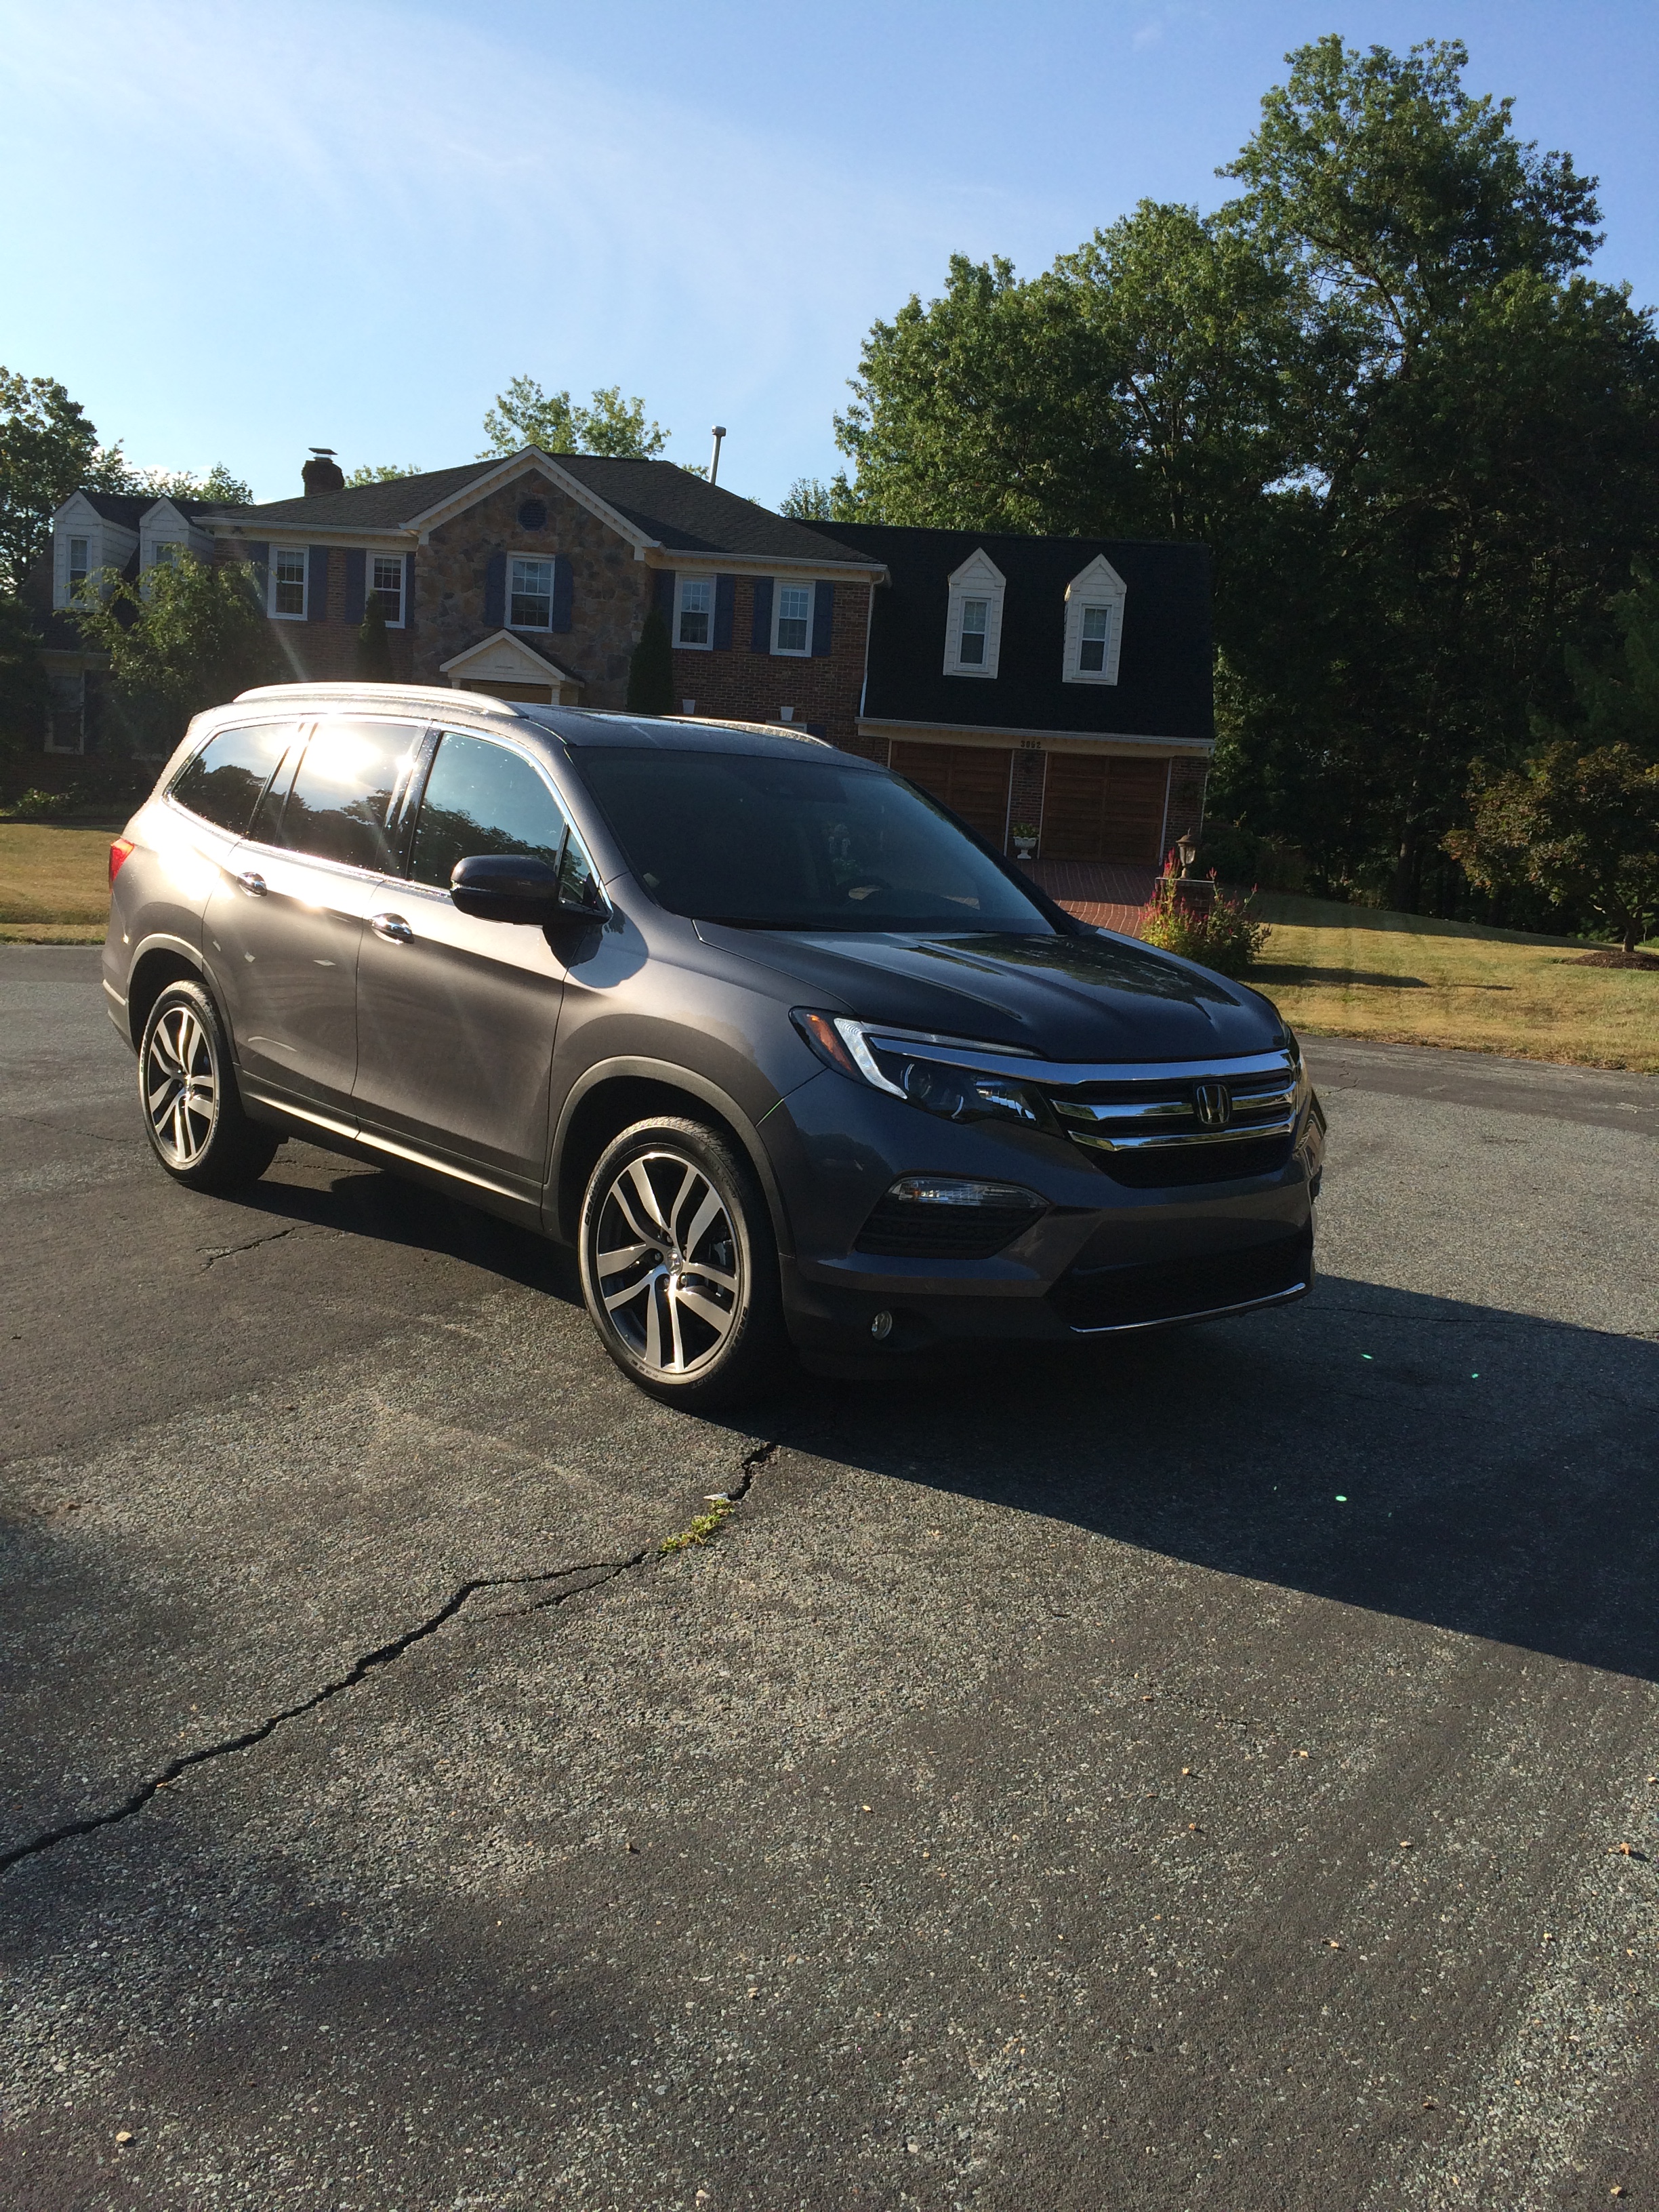 Car Report: 2016 Honda Pilot sports a new look, inside and out